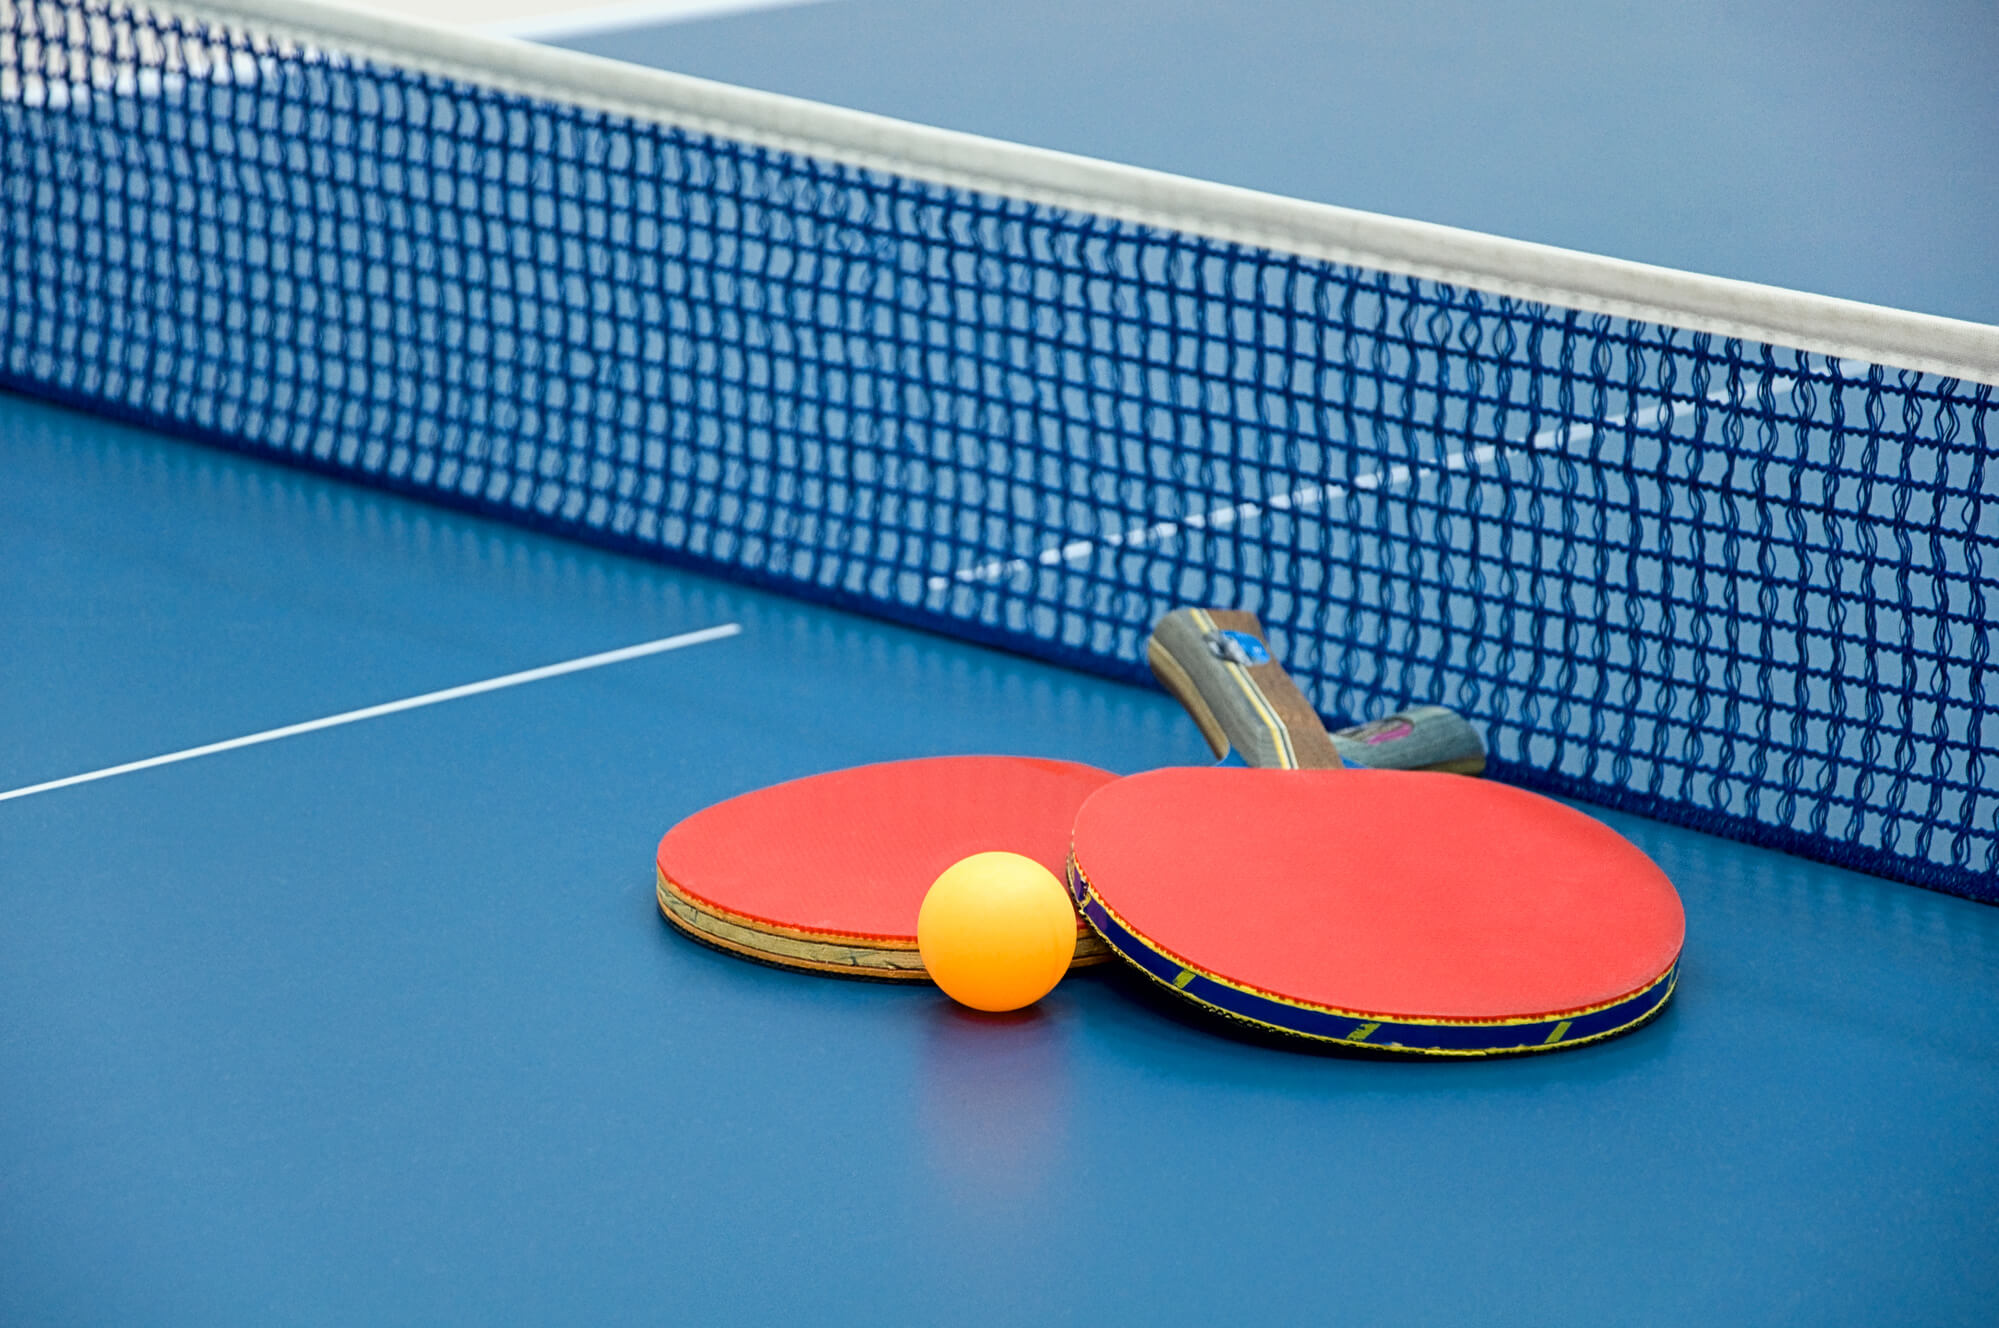 World Table Tennis Day (April 23rd) Days Of The Year